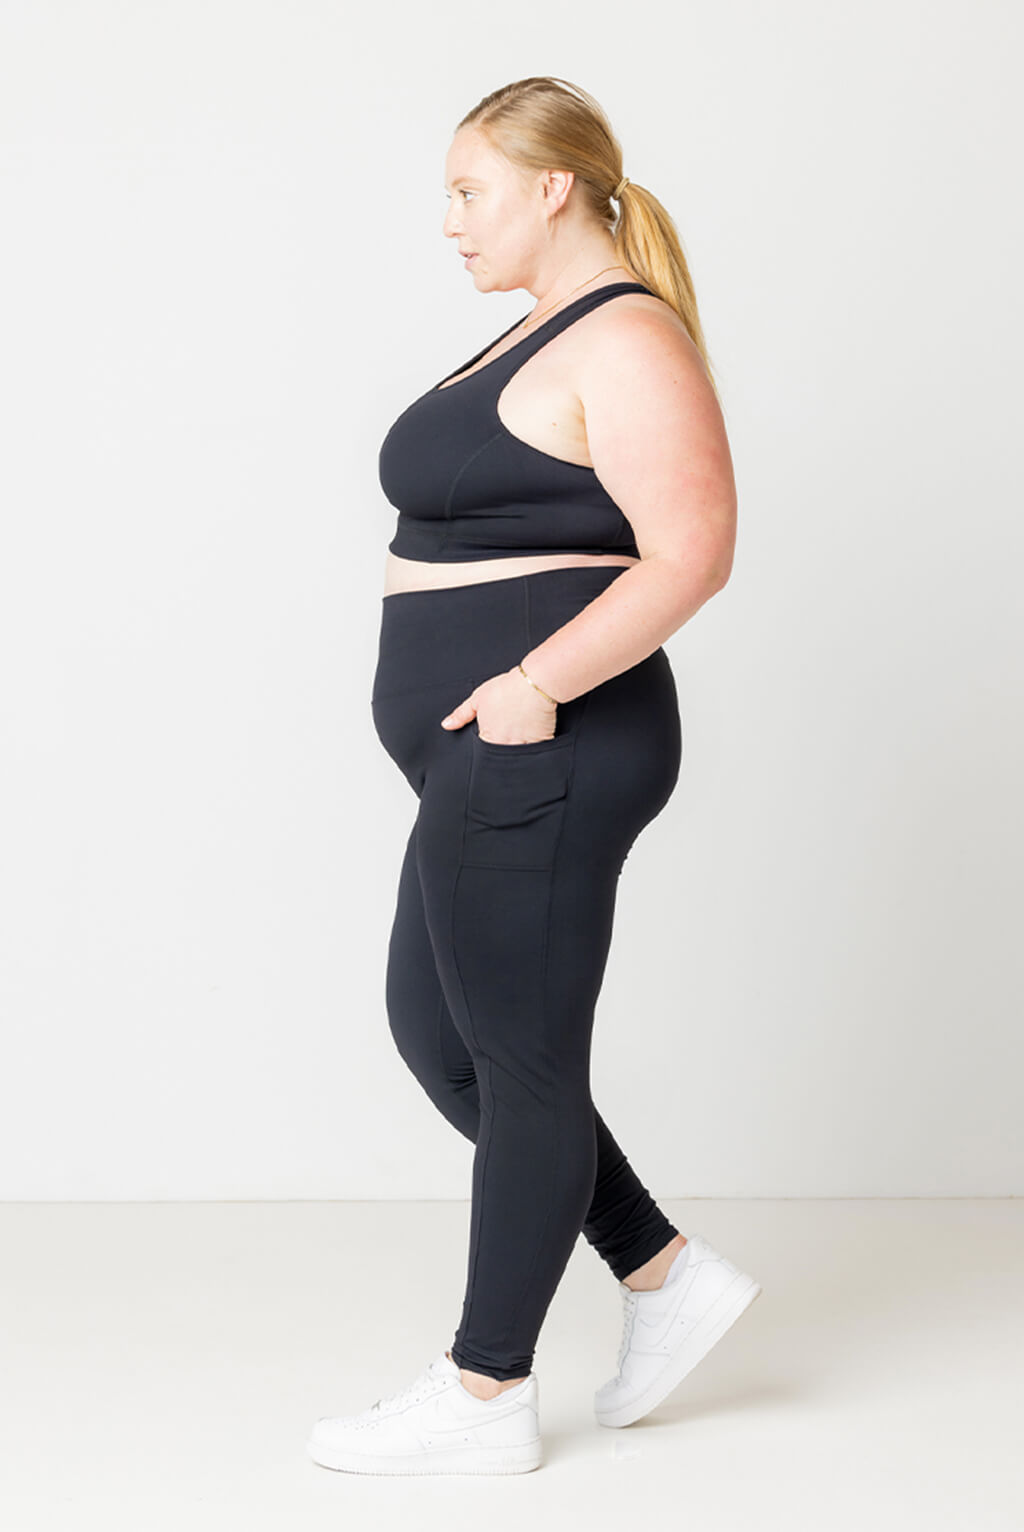 Profile shot of plus size model walking with her hand in the pocket of her Superfit Hero compression leggings.